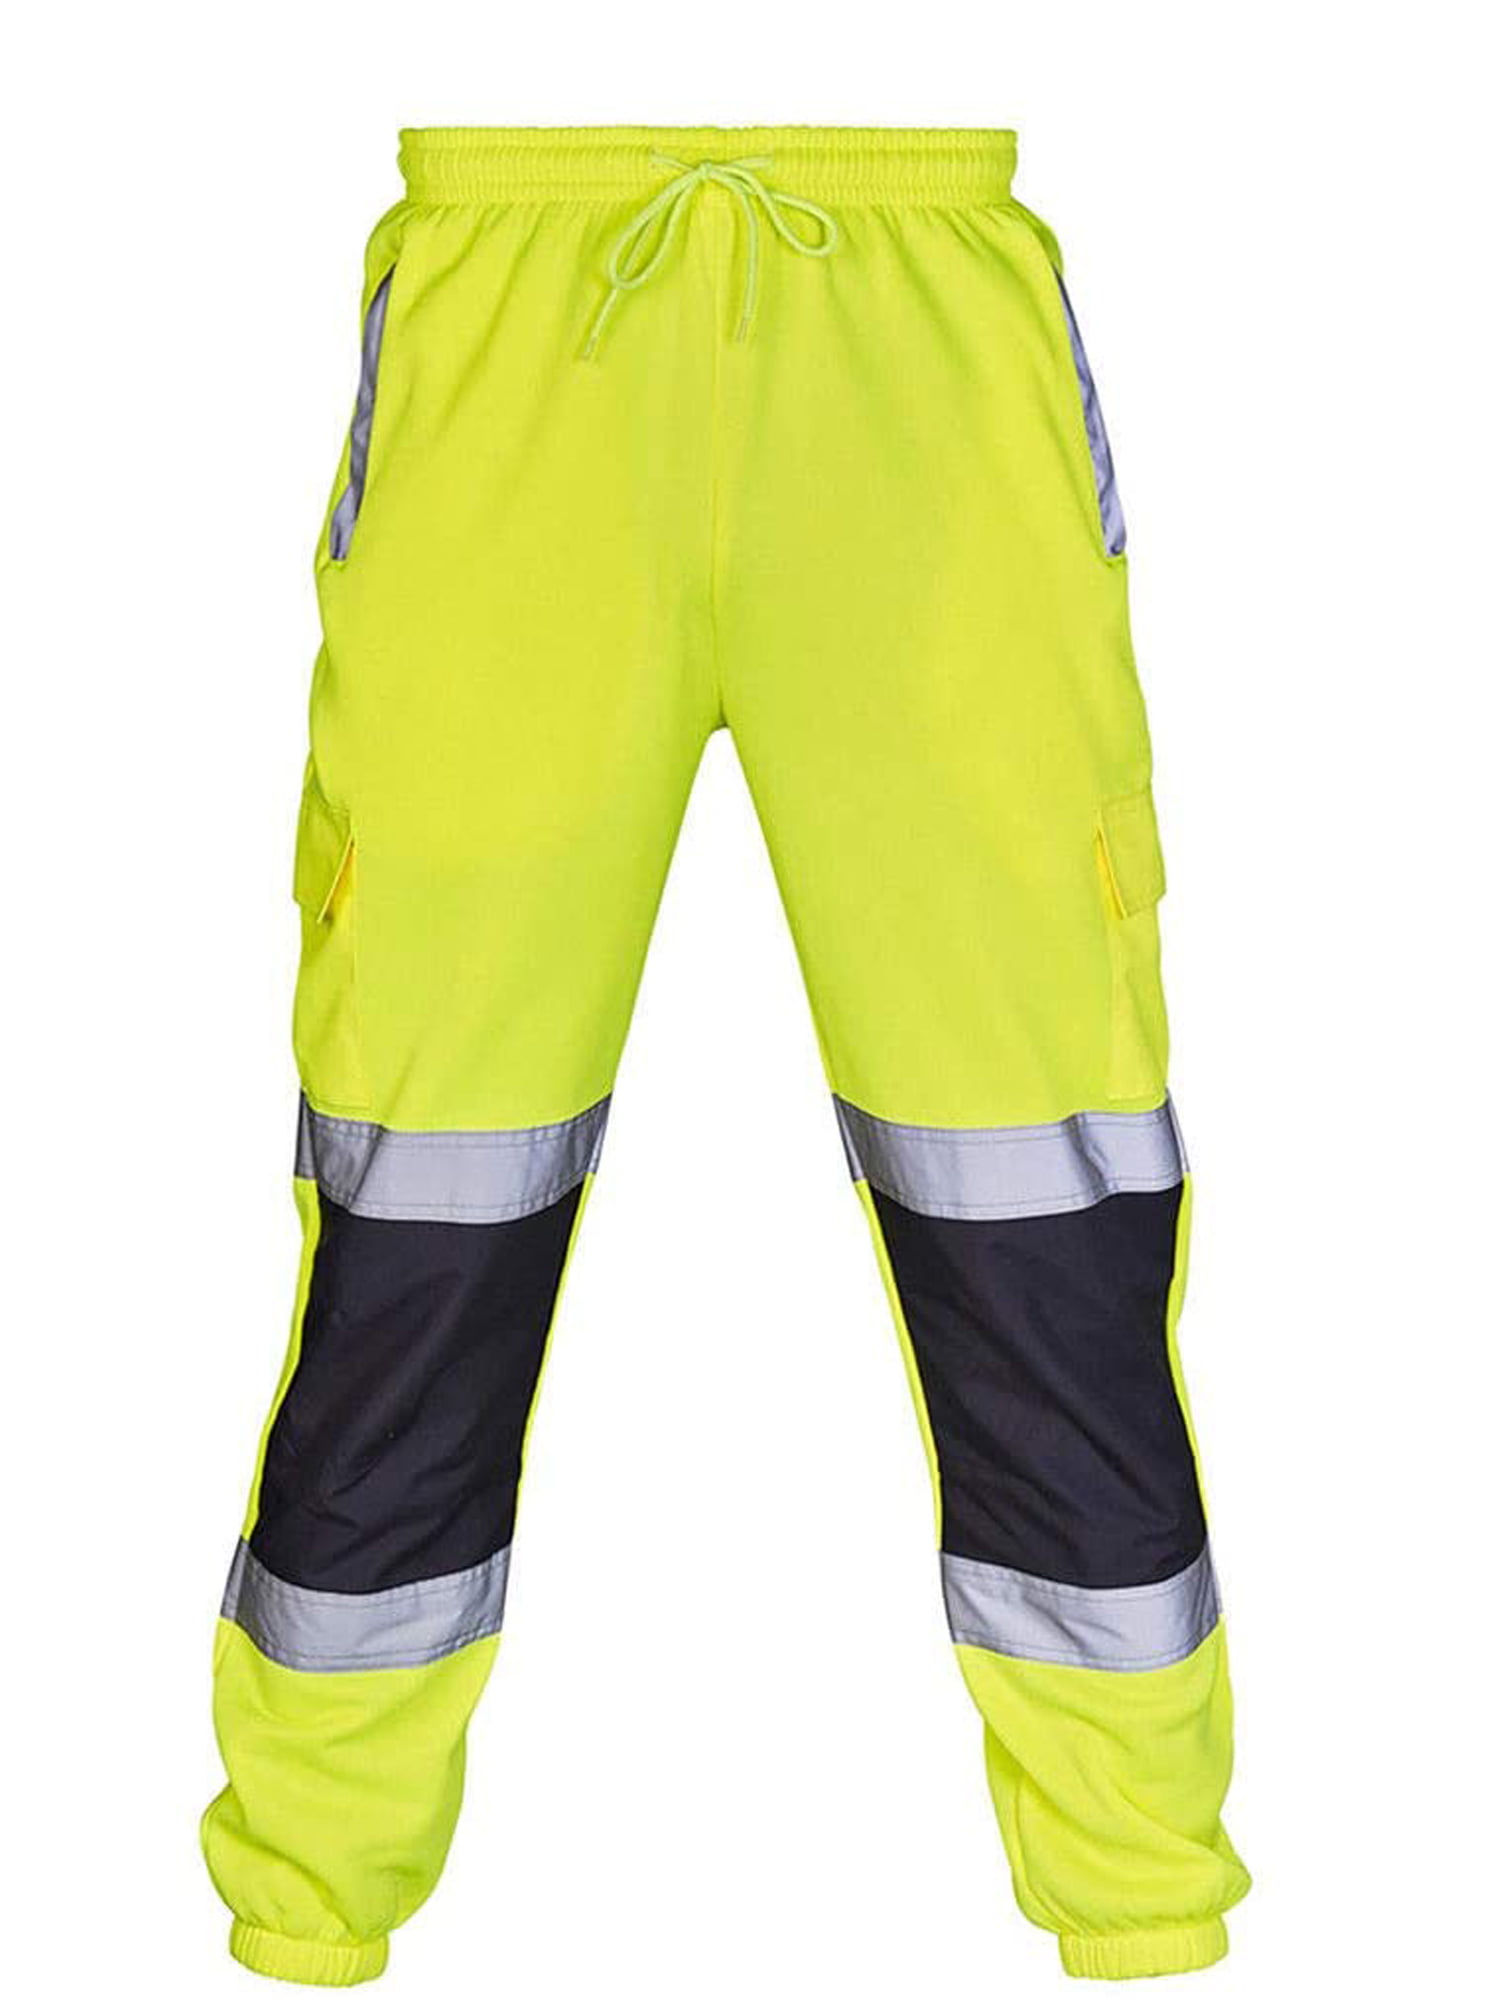 Reflective Hi Vis Industrial Work Pants Cotton Enhanced Visibility Safety NEW! 